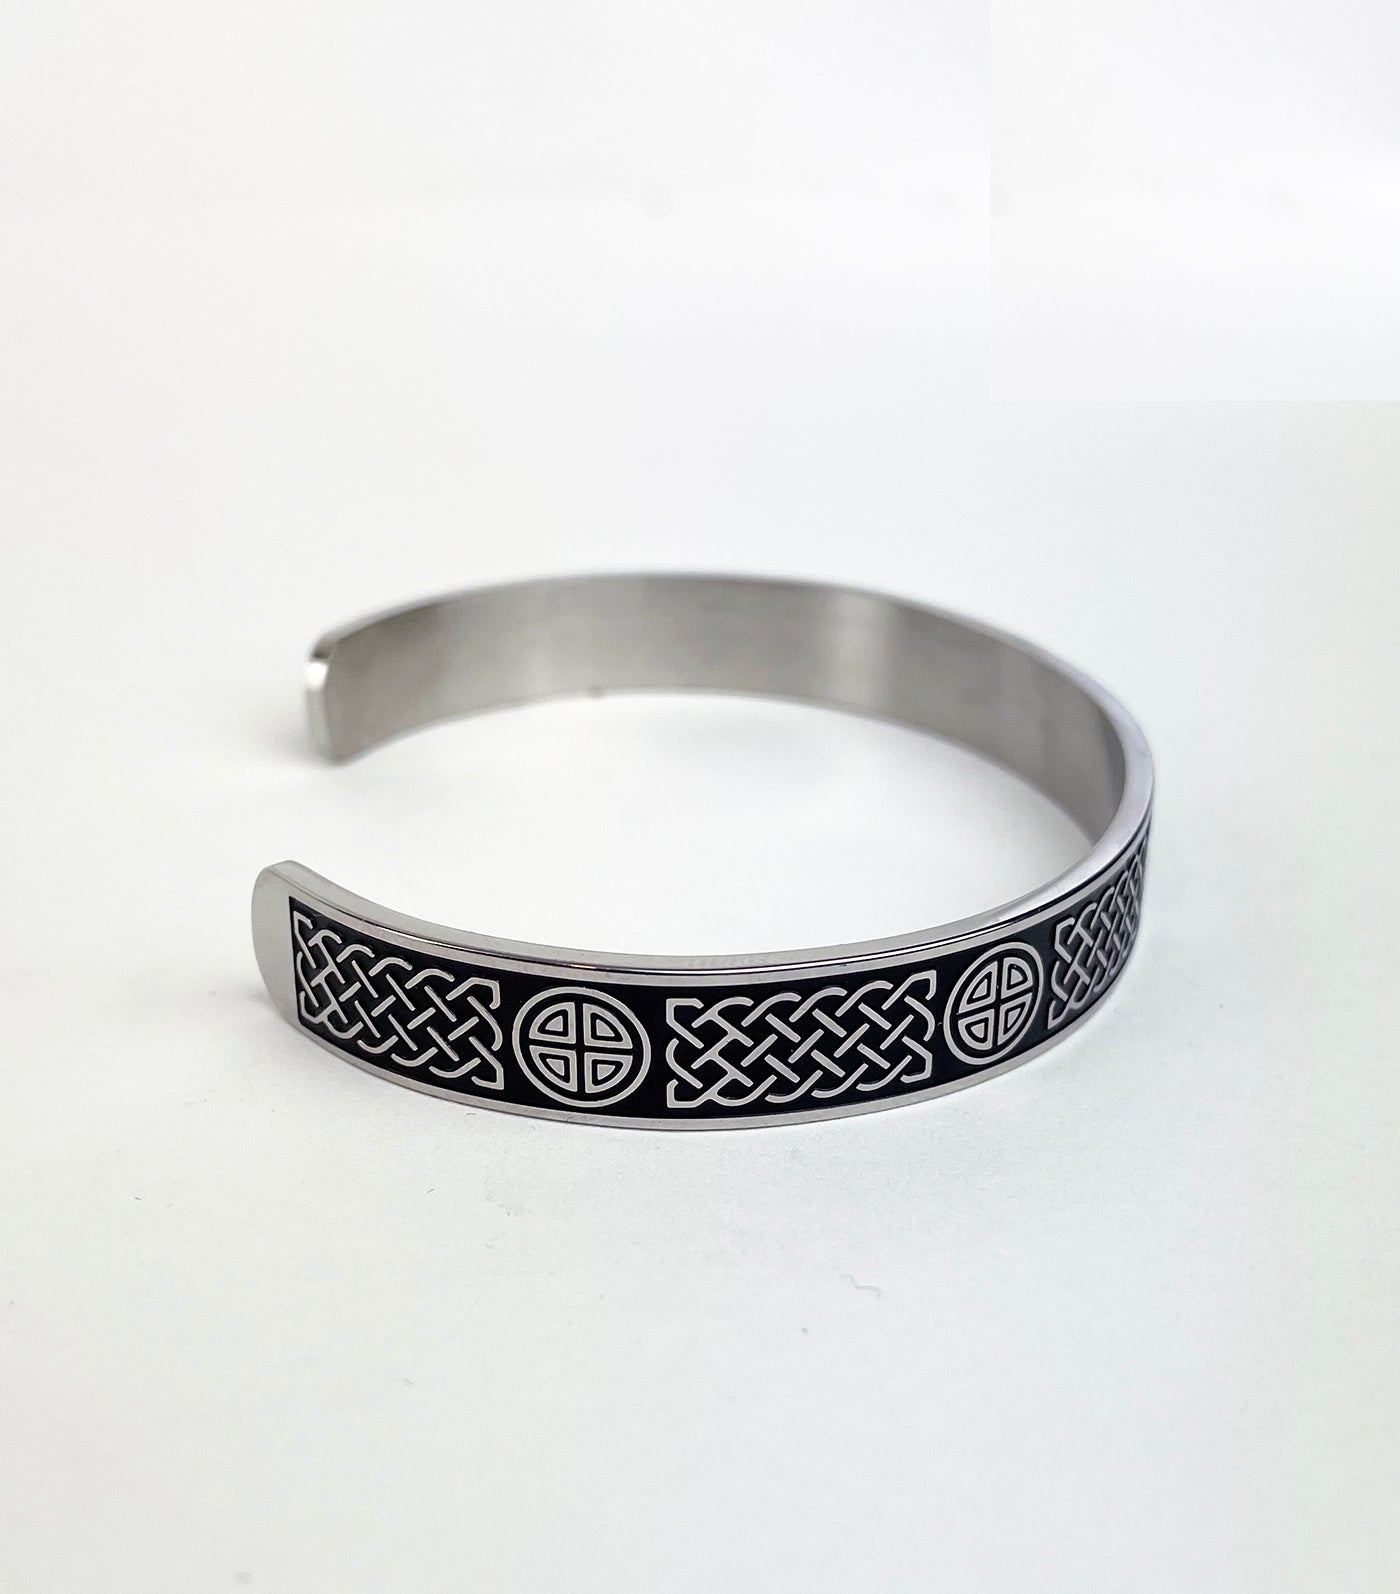 Men's Stainless Steel Cuff Bracelet with Rectangle Celtic Knots